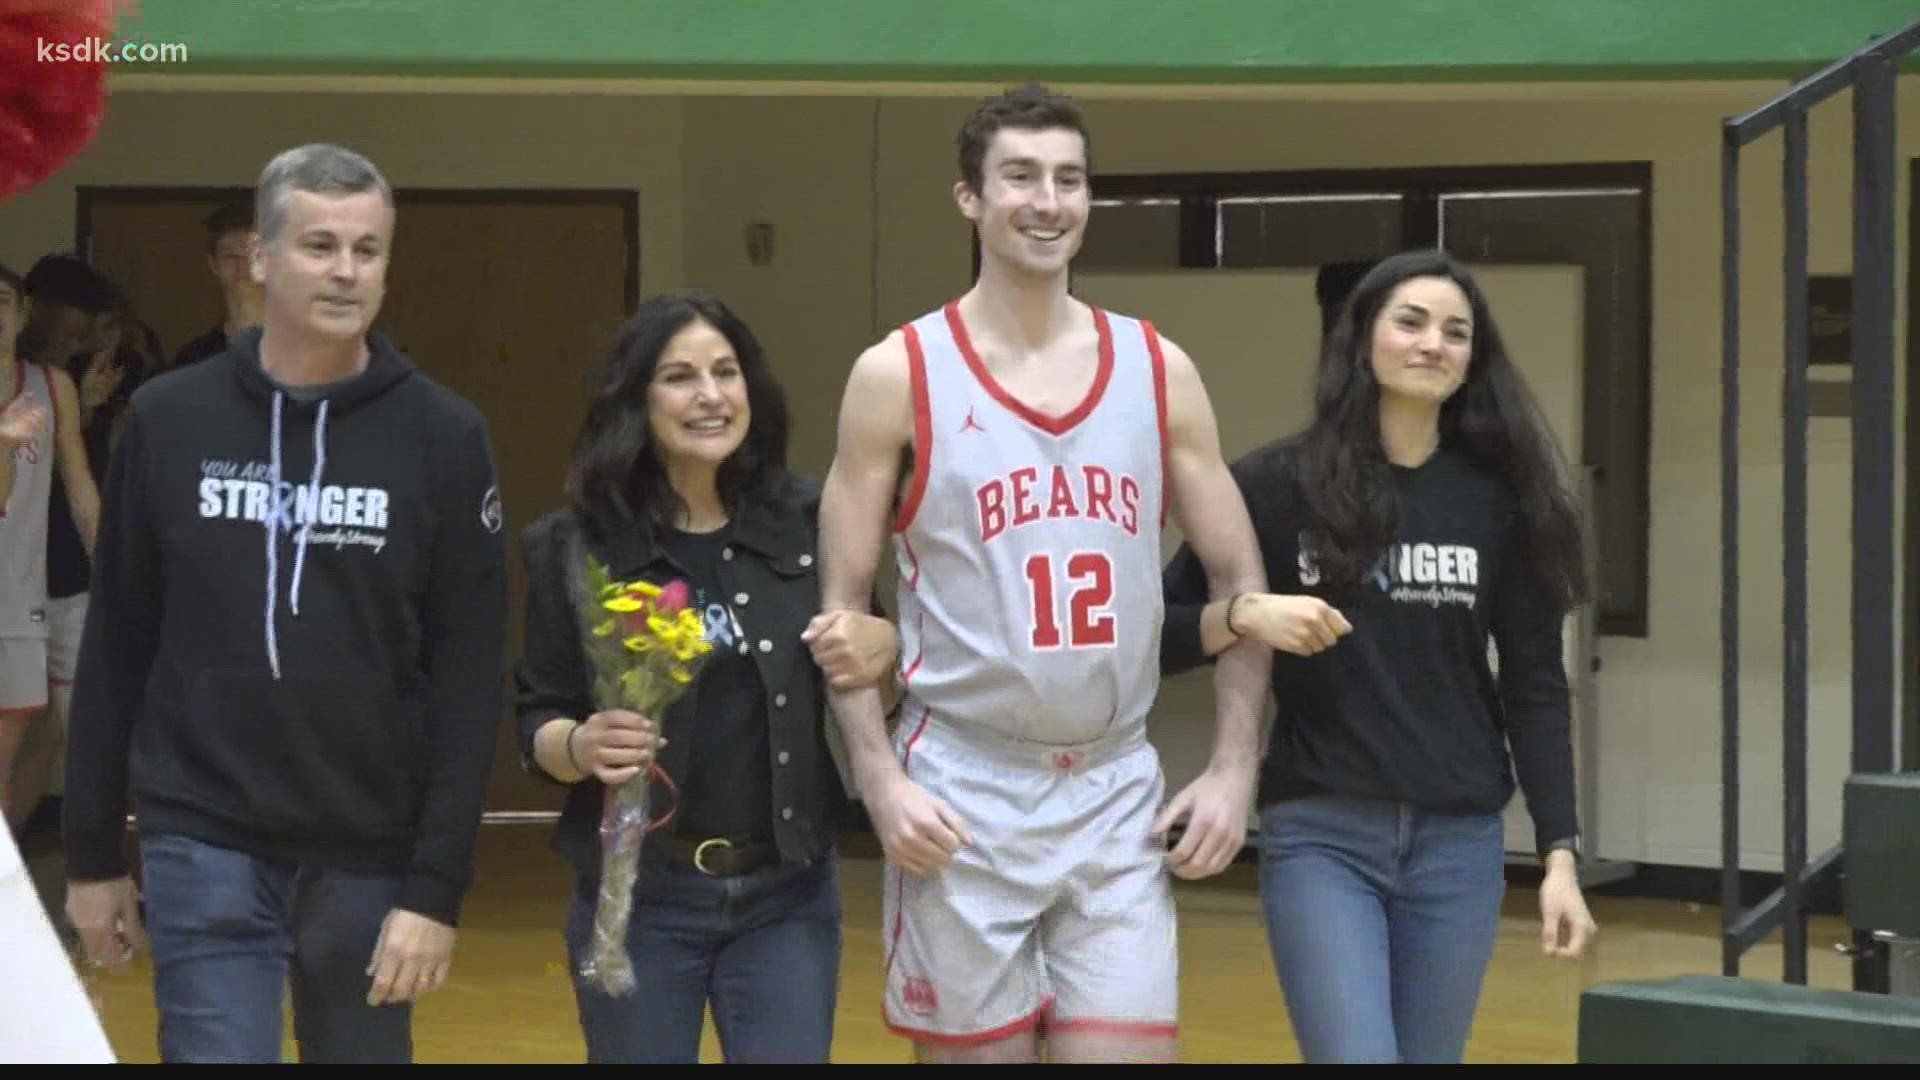 Hardy is battling Stage 4 stomach cancer. But he got the chance to suit up on senior night.